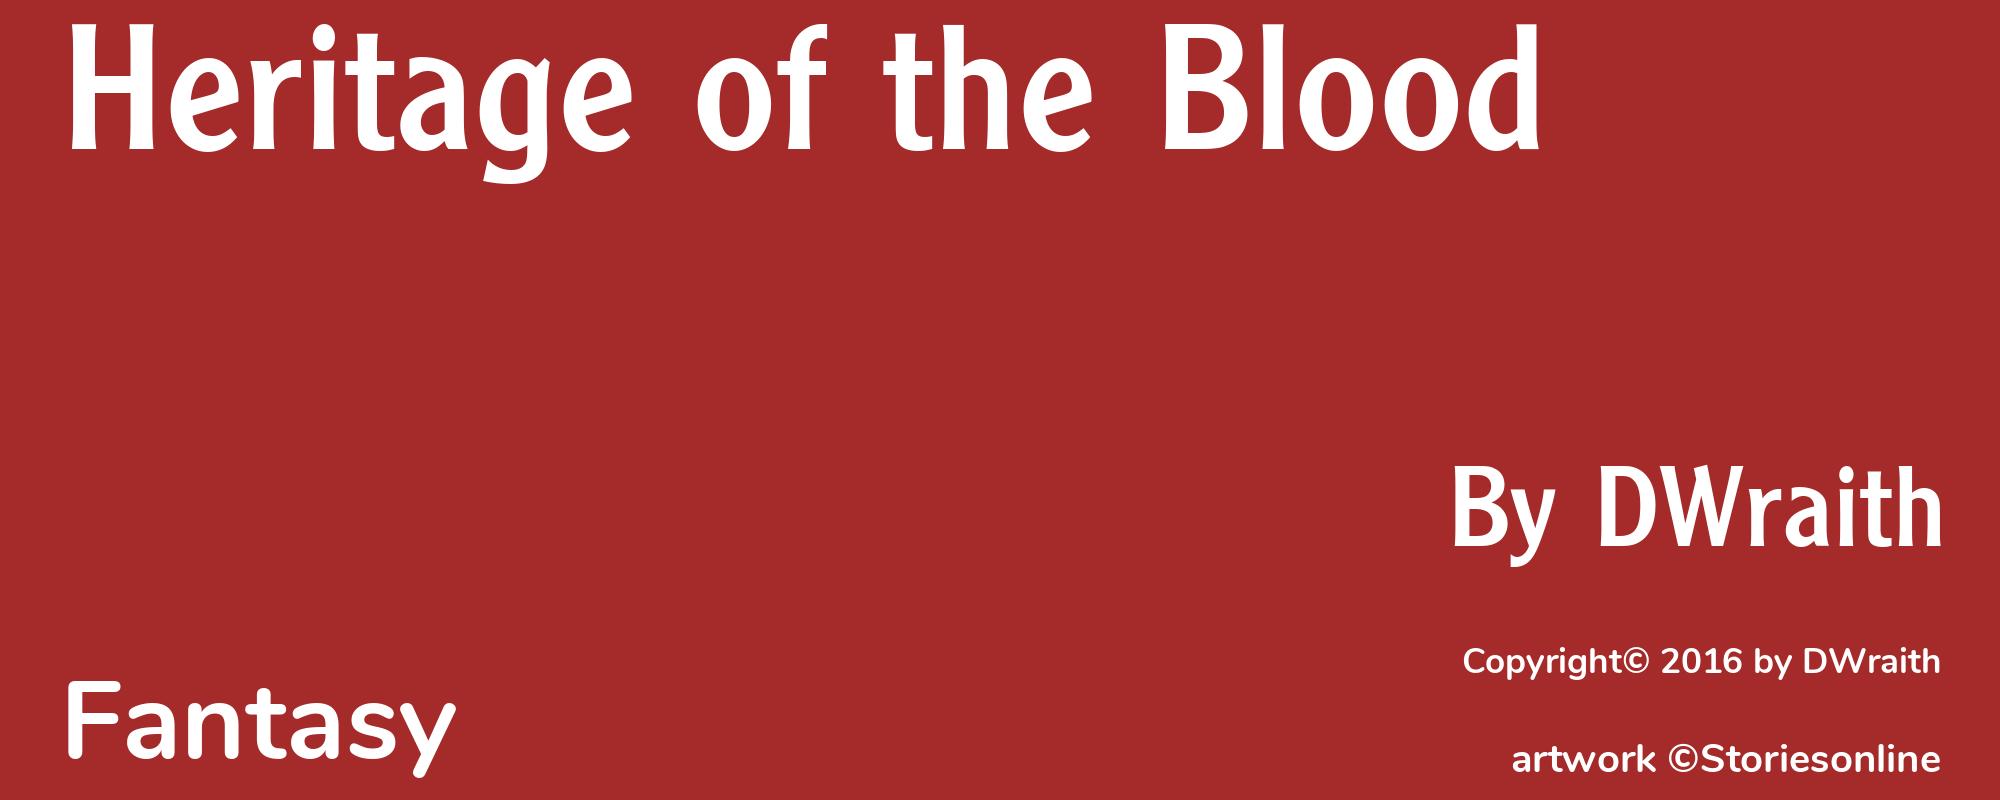 Heritage of the Blood - Cover